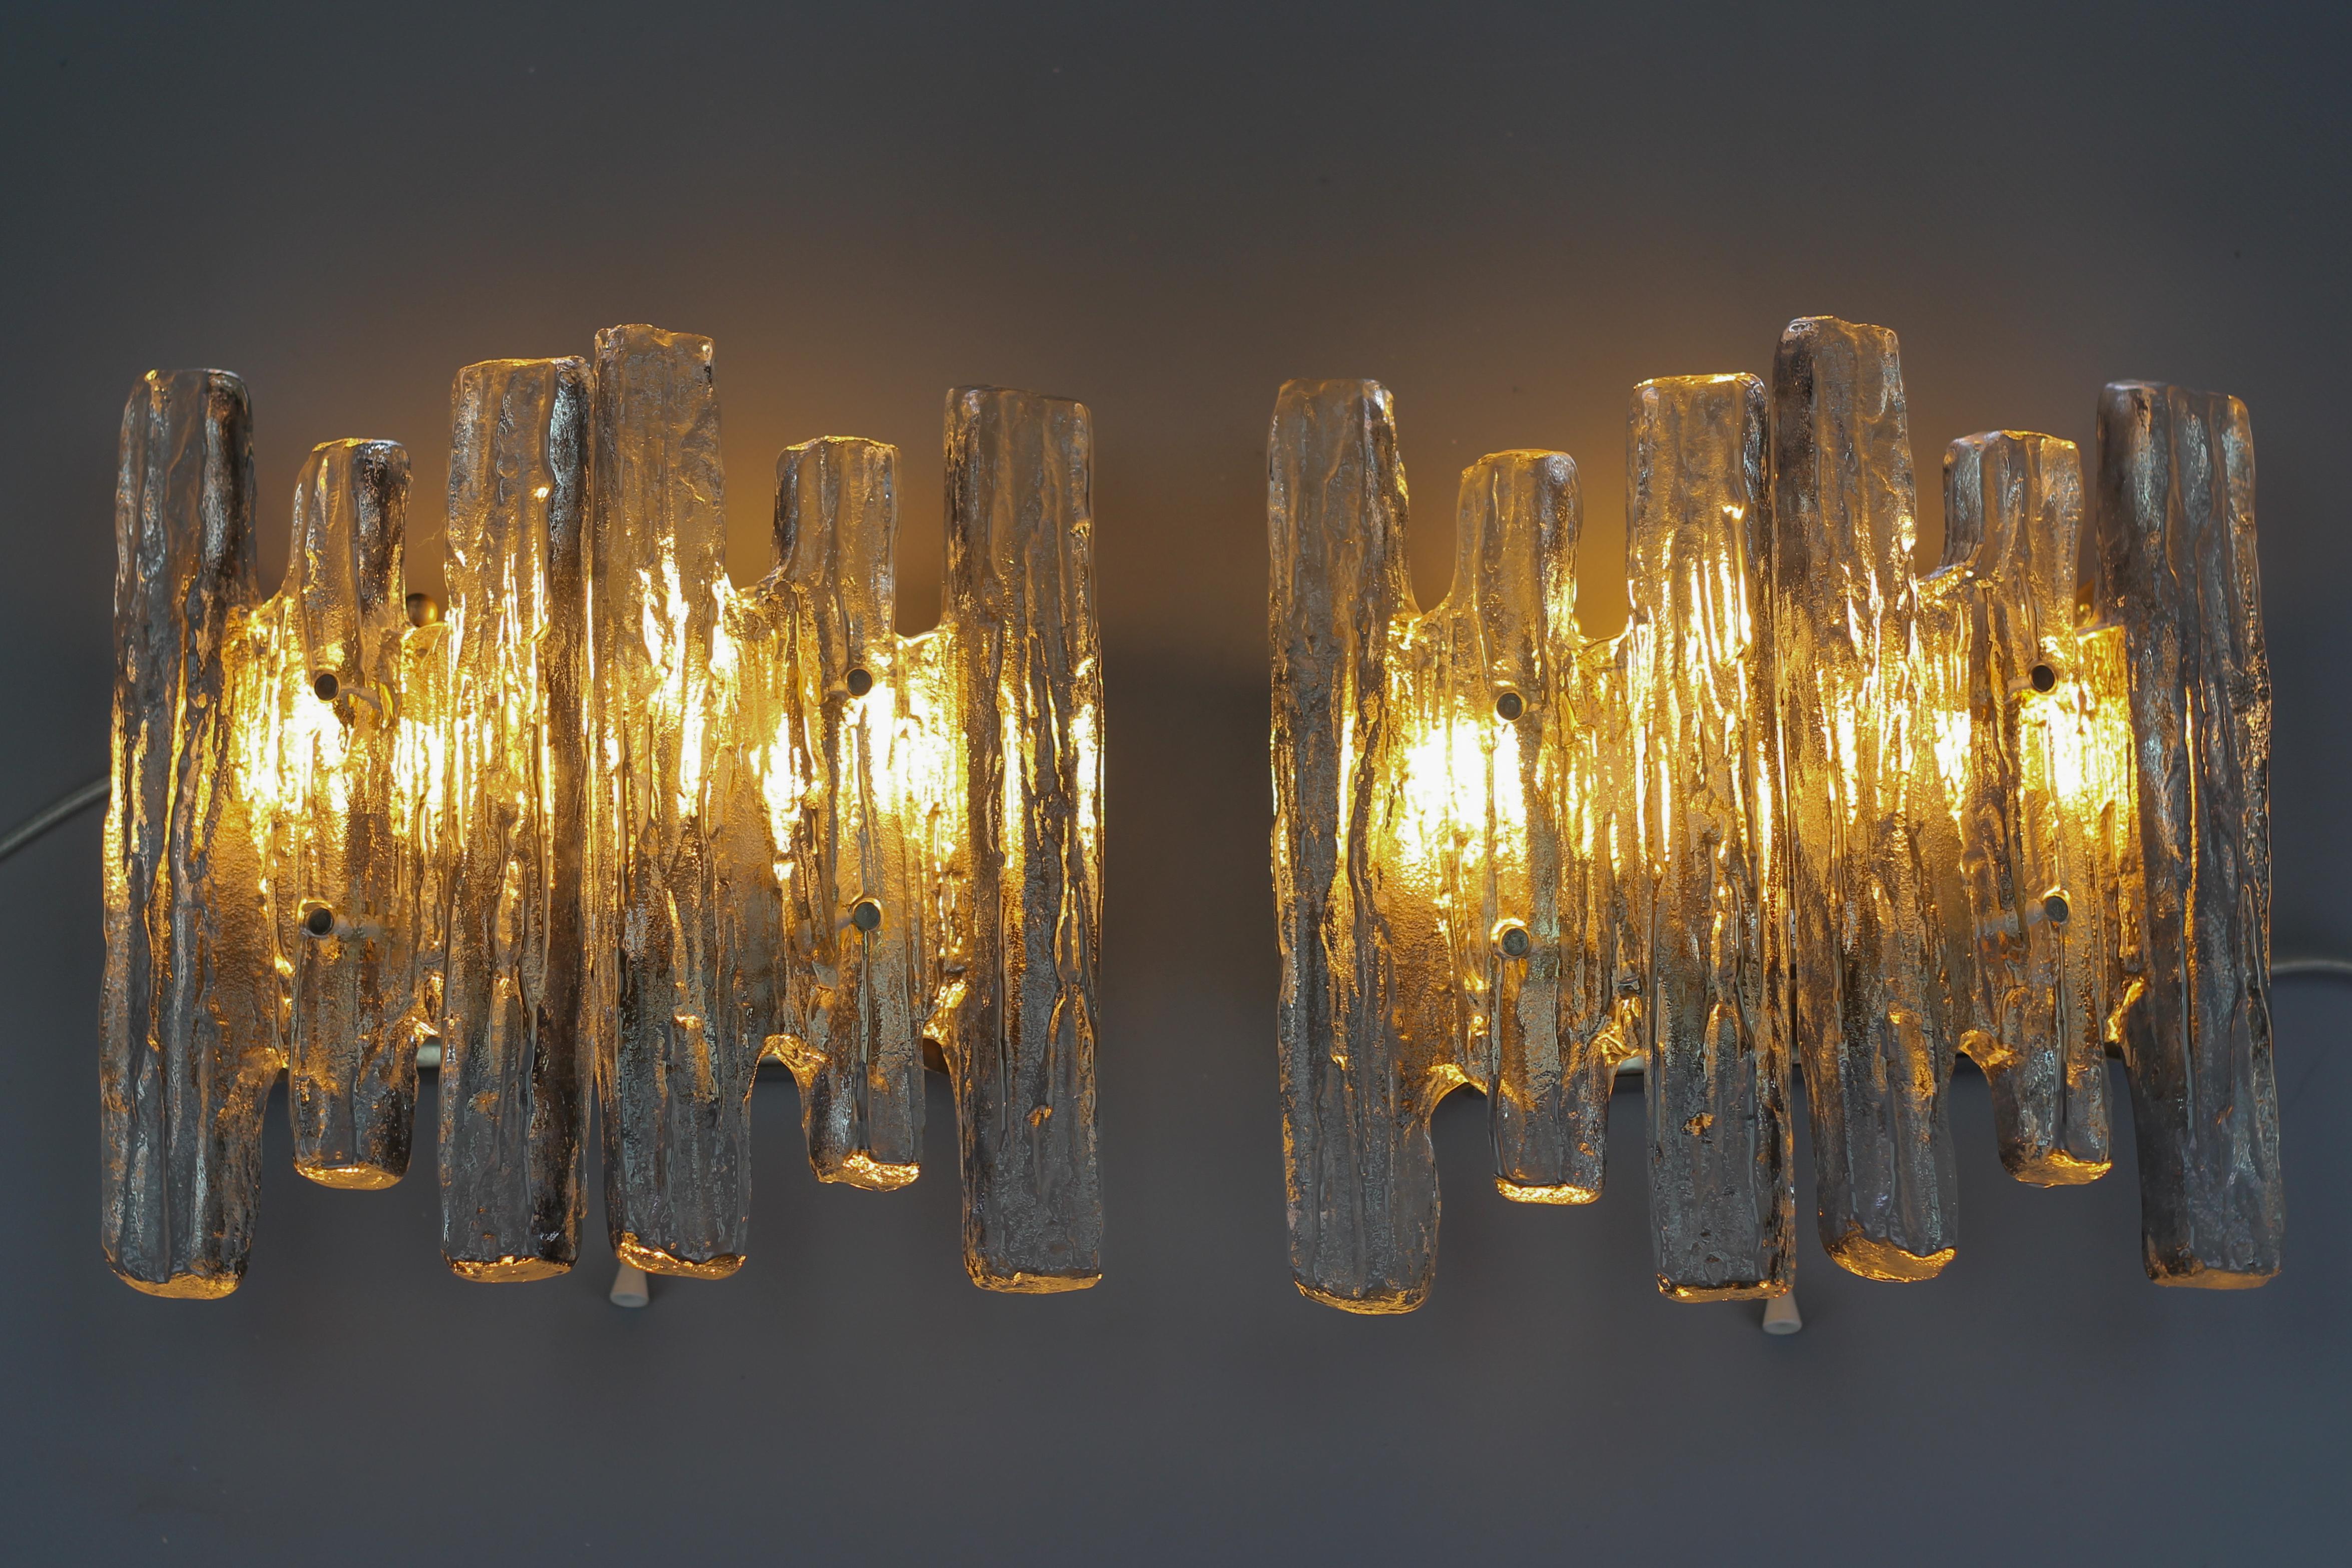 An impressive pair of Mid-Century Modern icicle ice glass wall sconces made by Kalmar, Franken KG, Austria, circa in the 1970s.
Beautiful and elegant design wall sconces, each having two heavy blocks of ice glass, nickel-plated steel backplate with